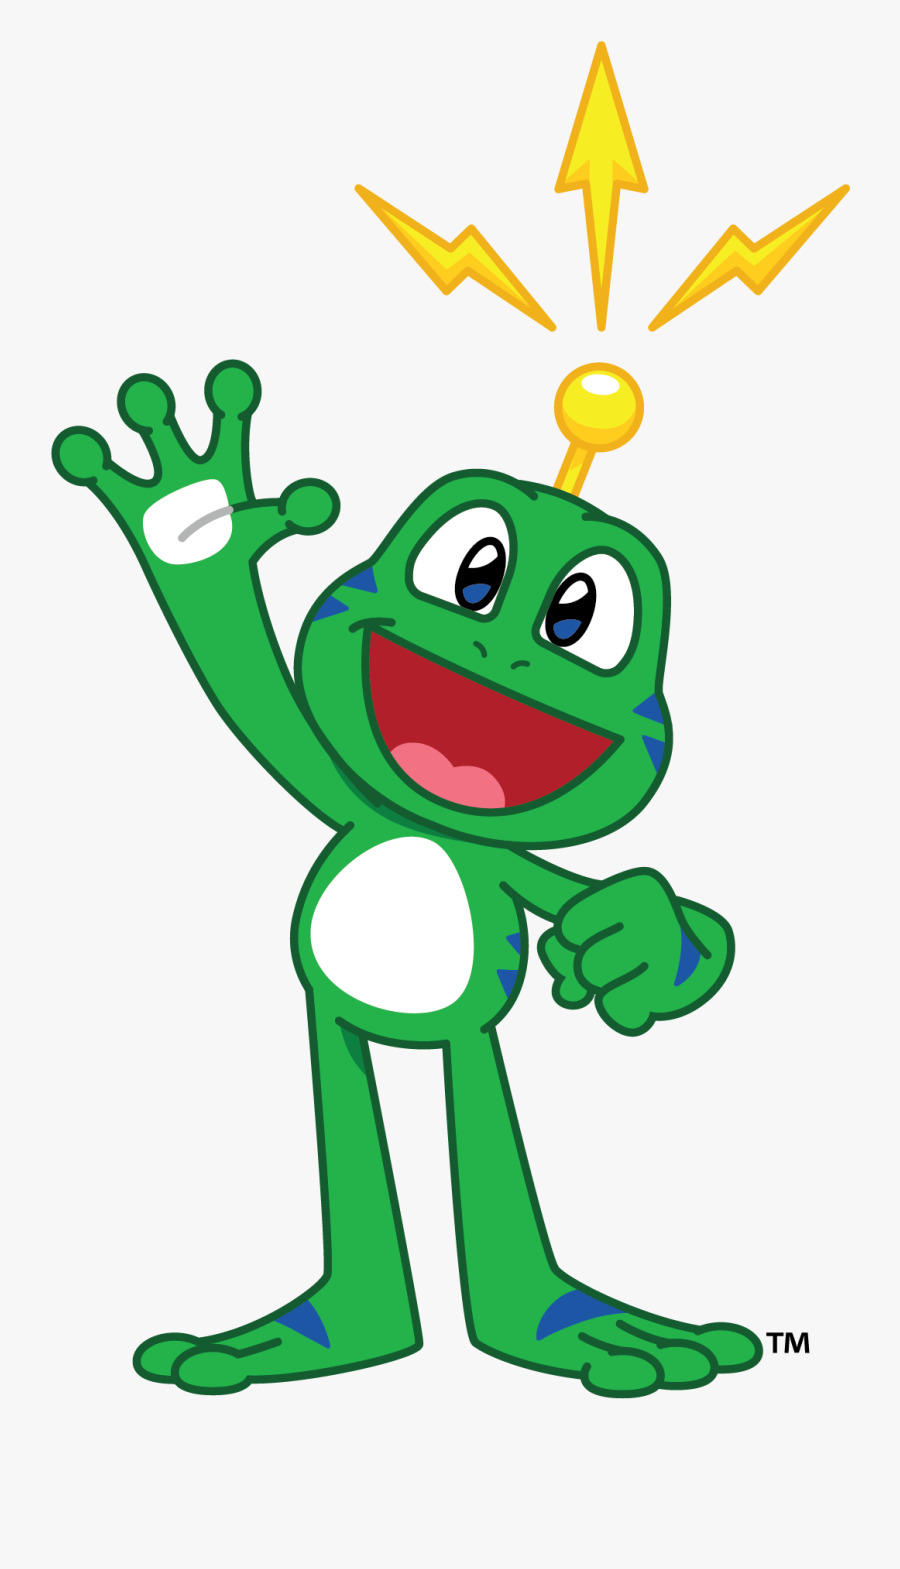 Signal the Frog